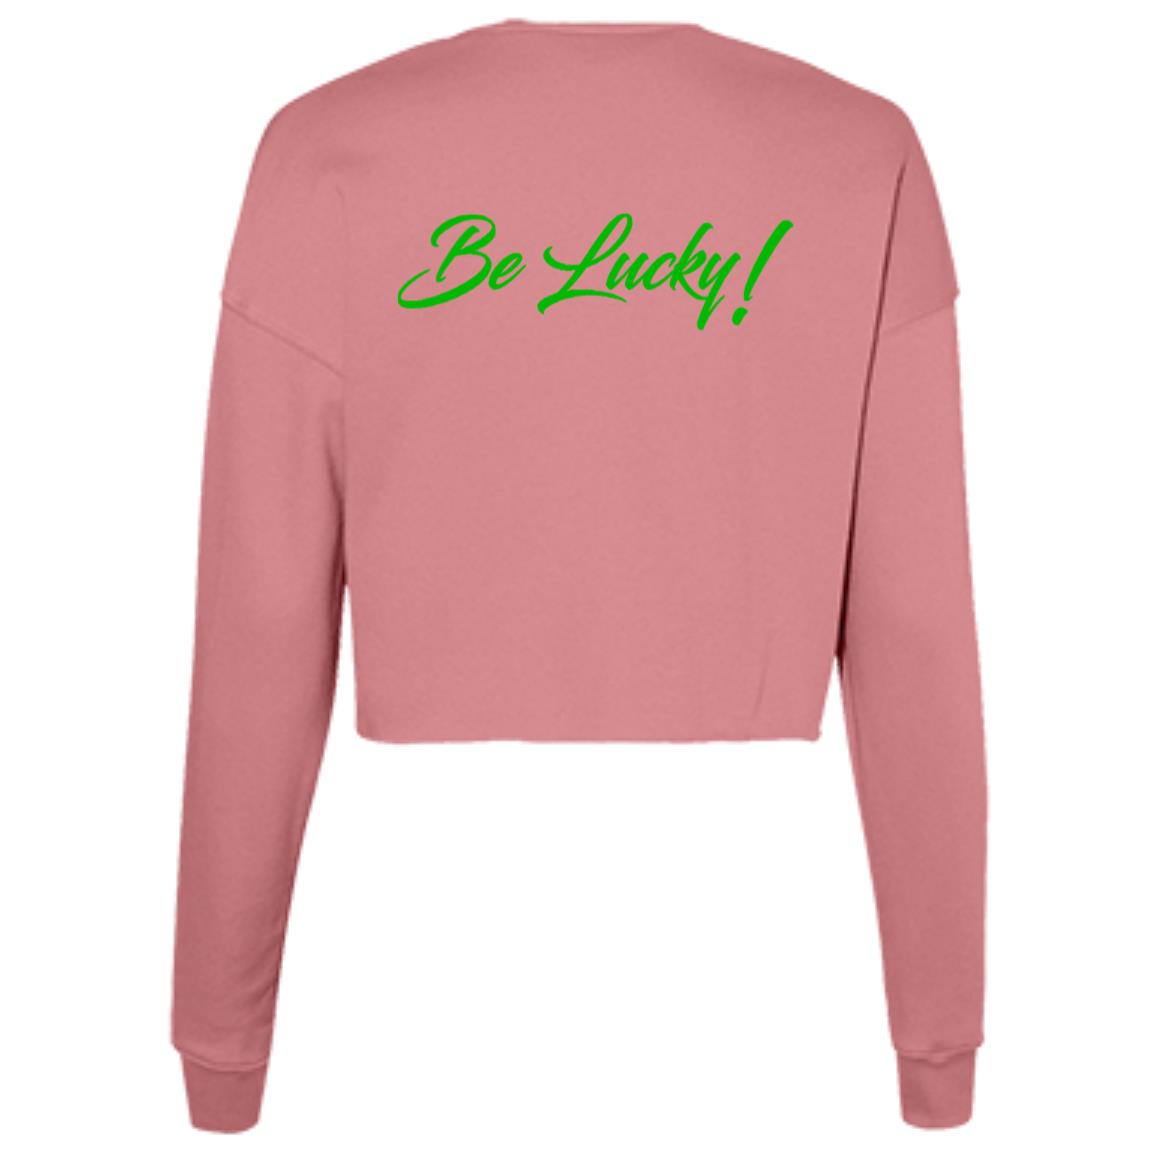 BE LUCKY Ladies' Cropped Crew